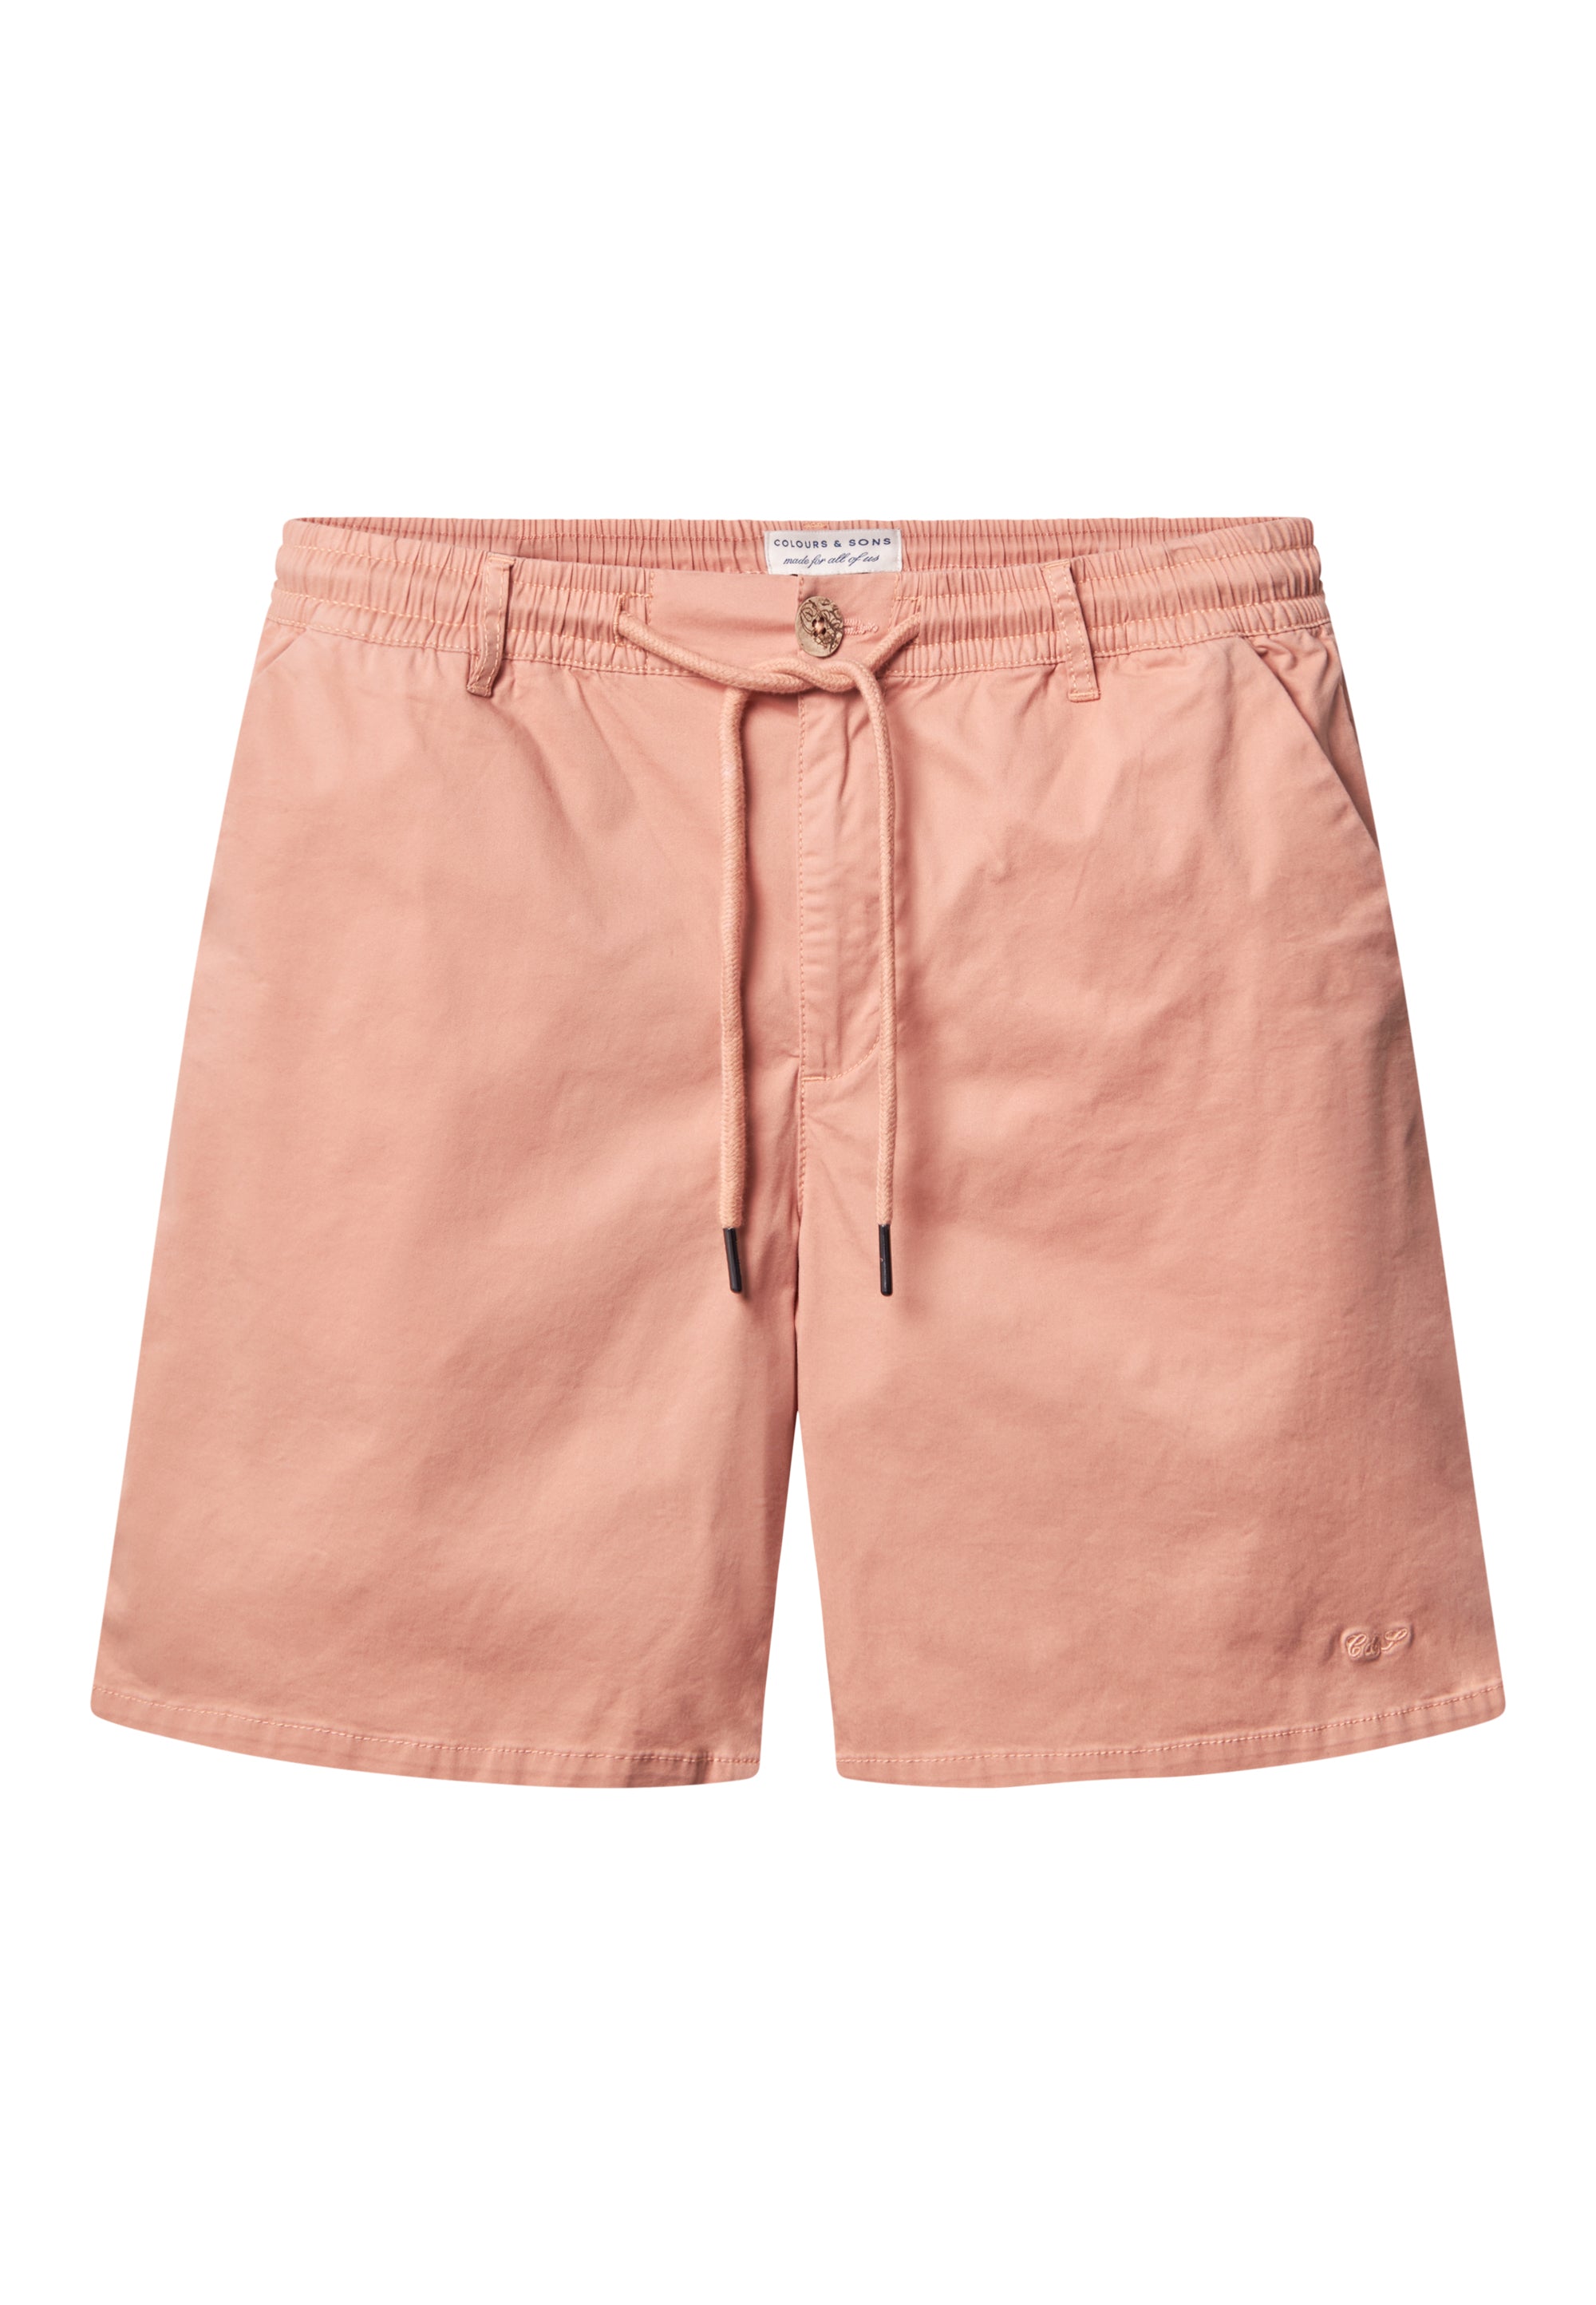 Shorts-Twill in Peach Shorts Colours and Sons   